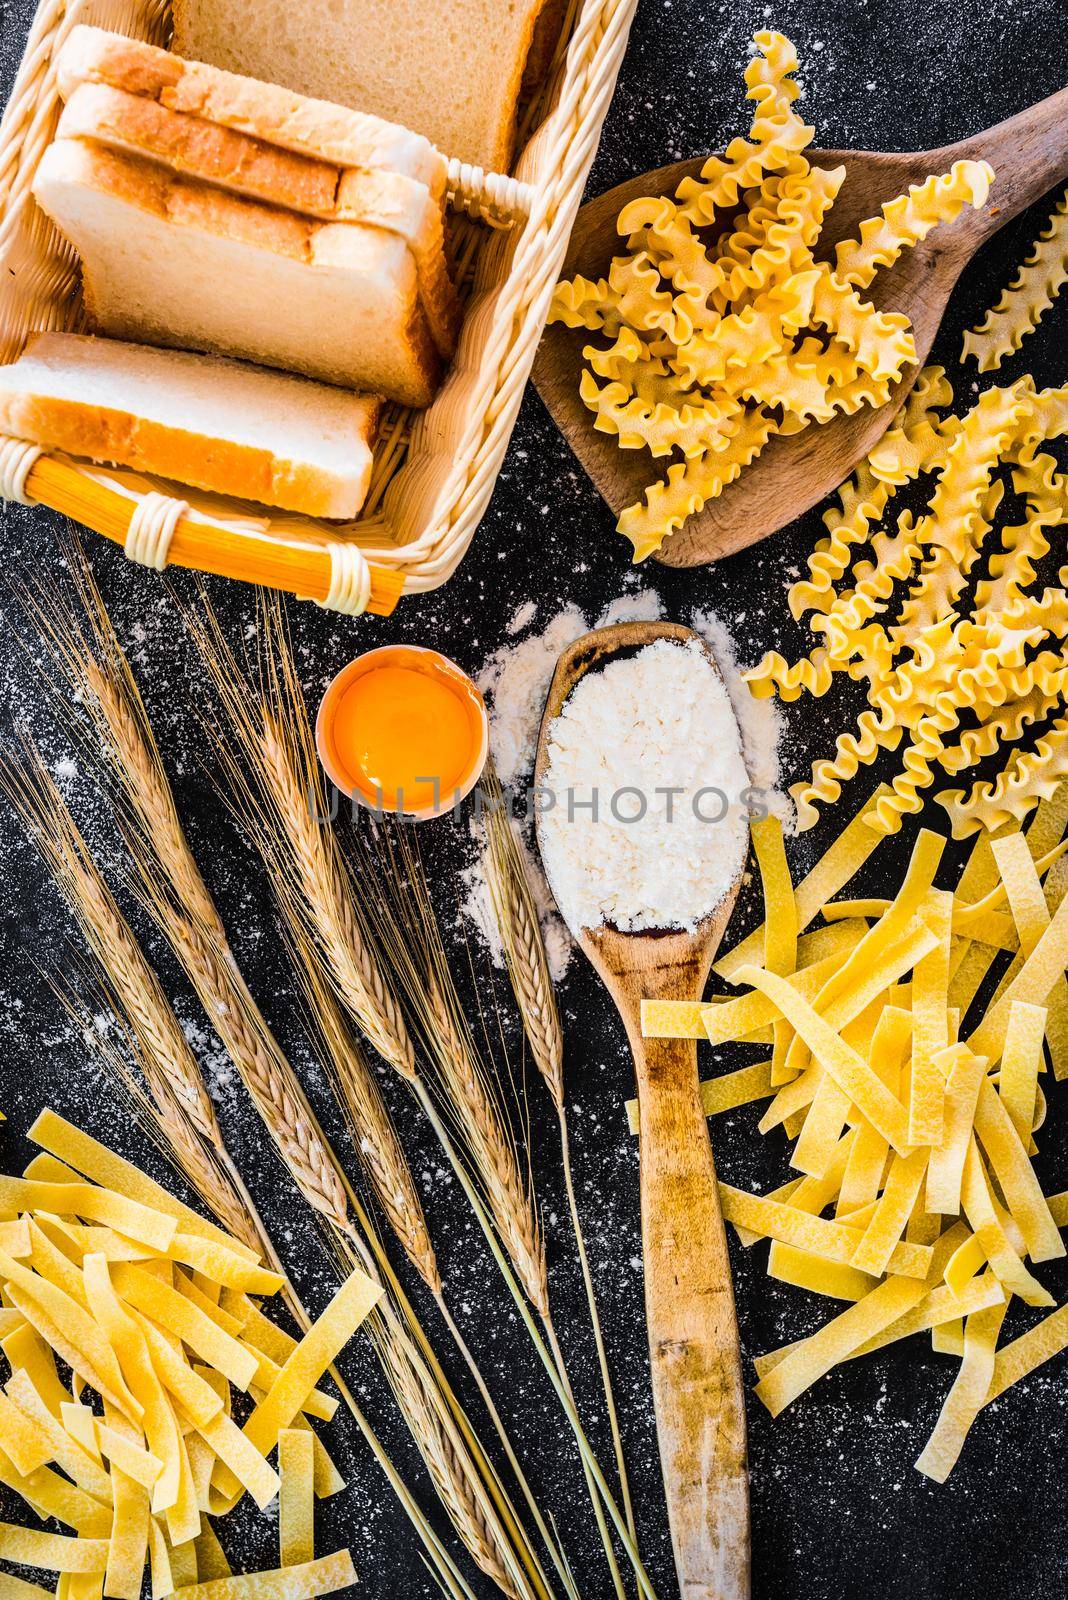 uncooked pasta, bread and other products on a black textured table